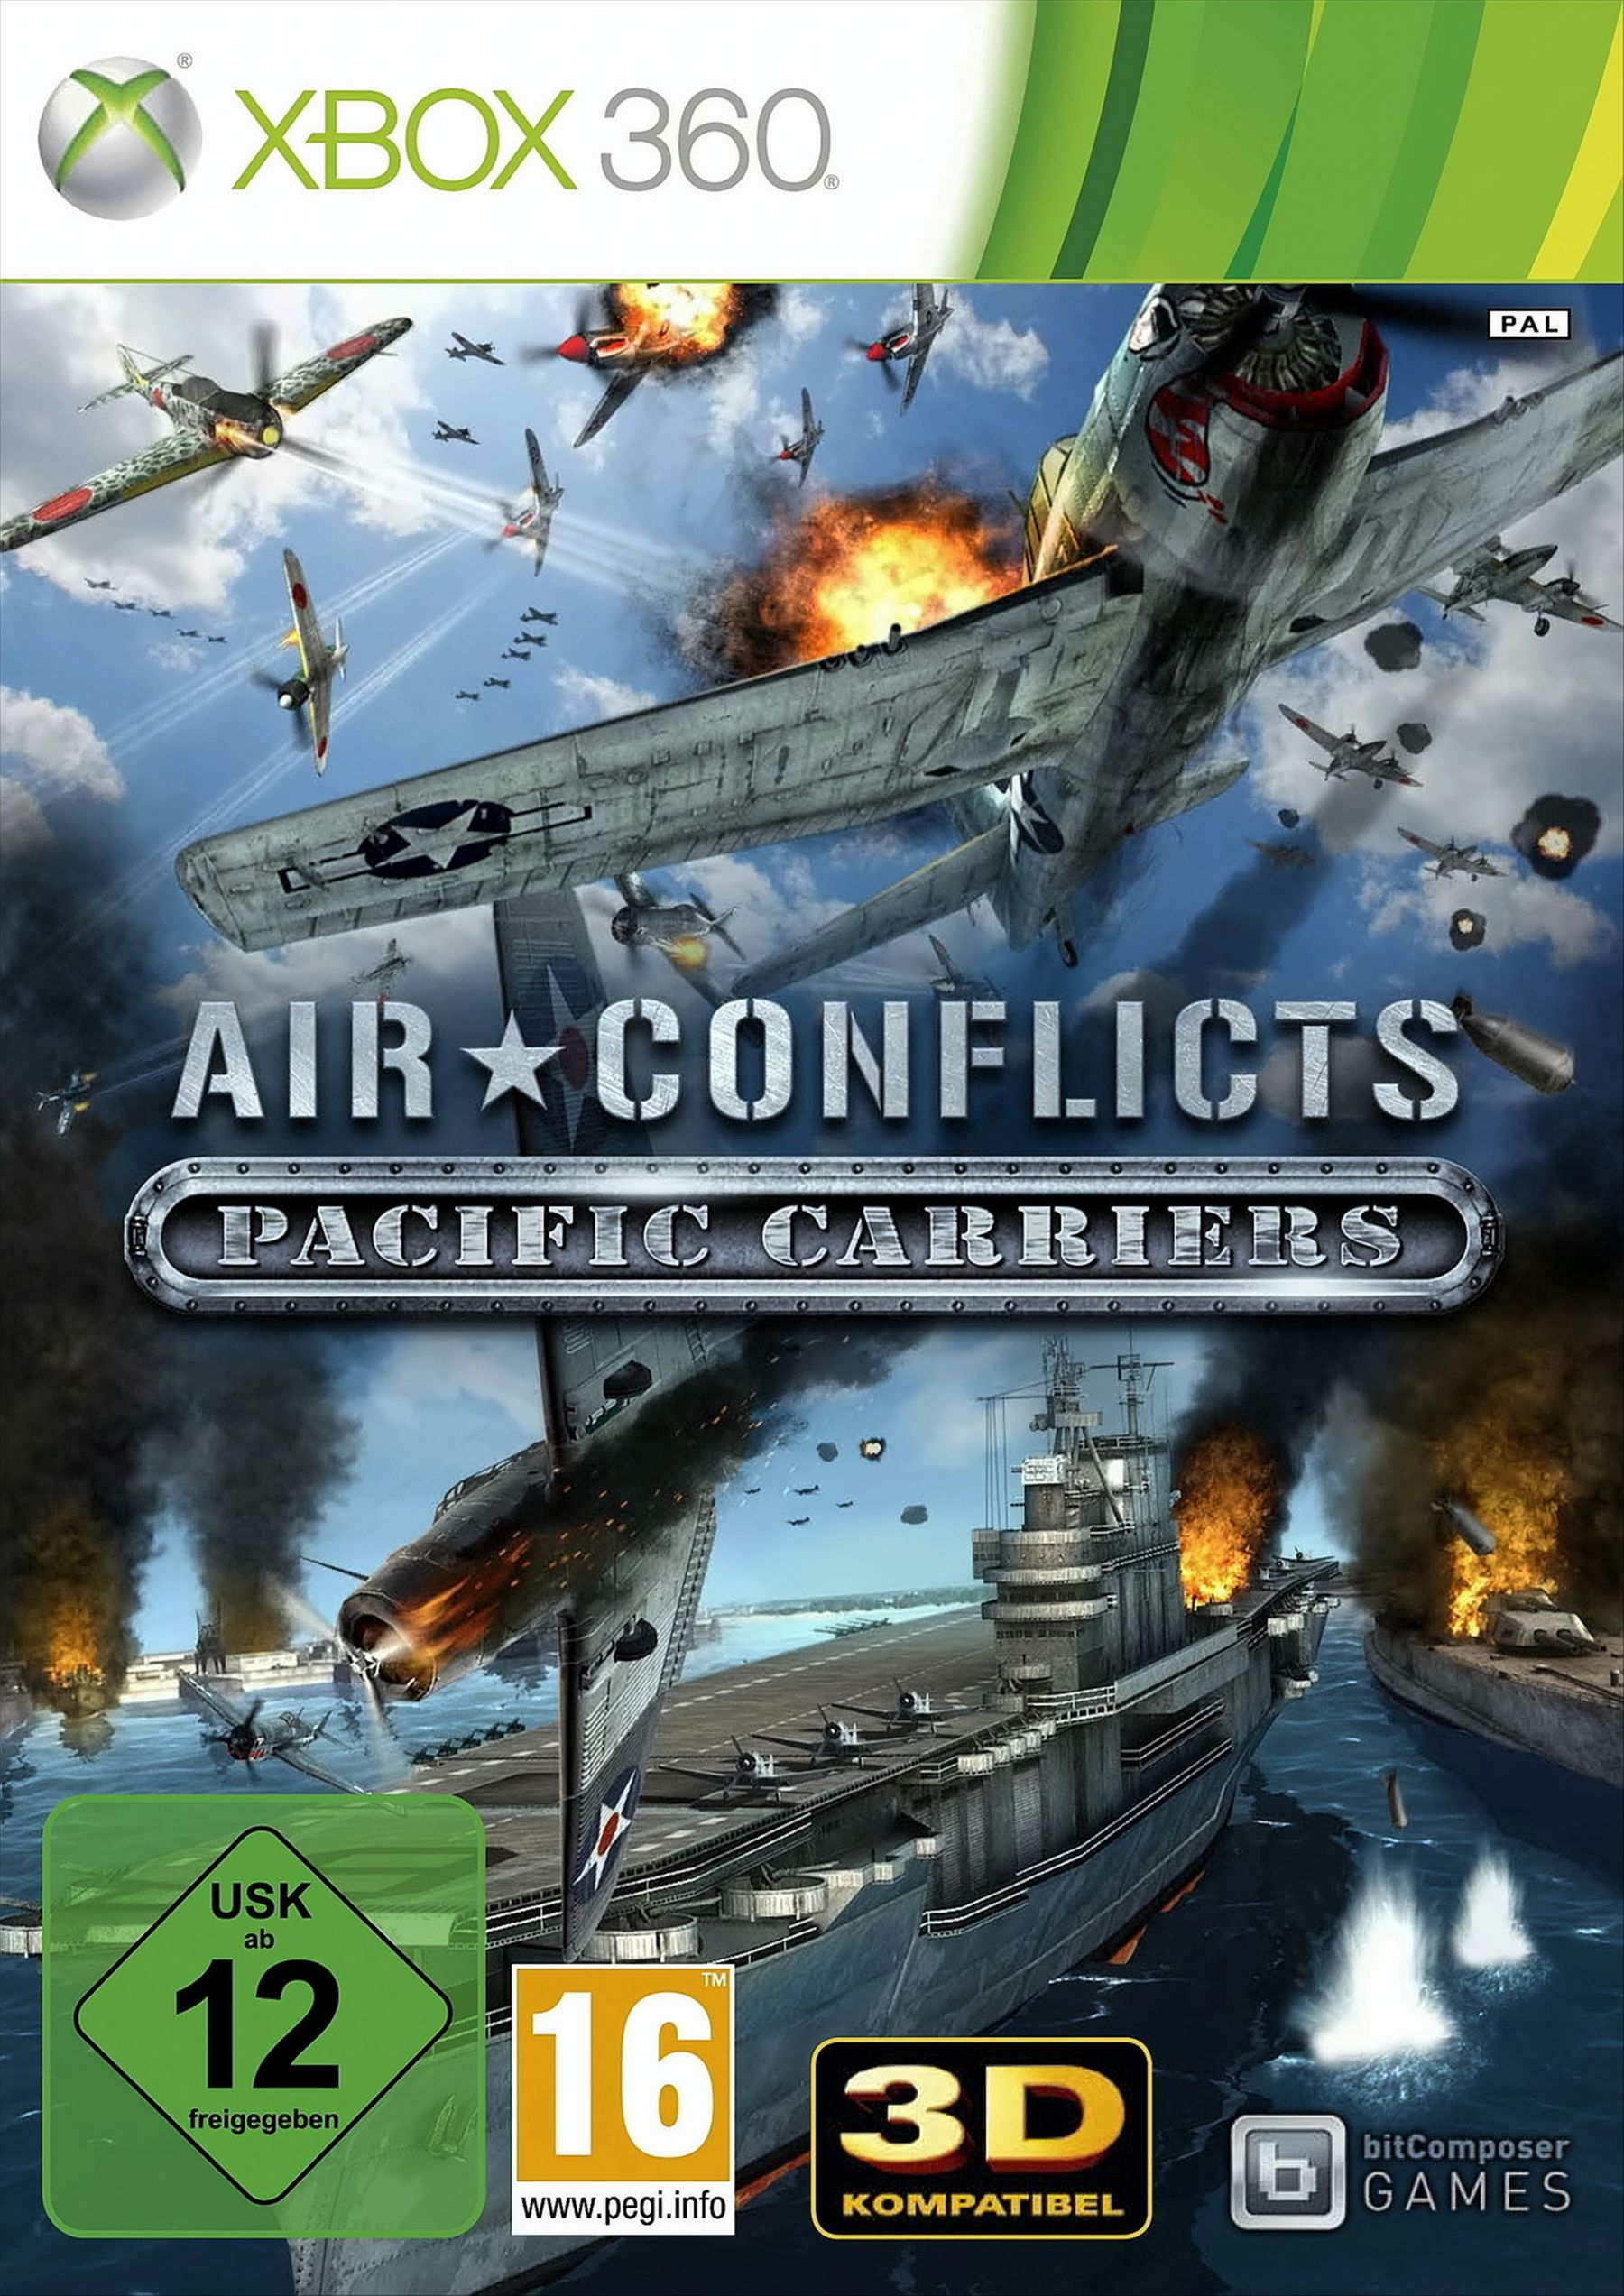 Conflicts: Air - [Xbox Pacific 360] Carriers